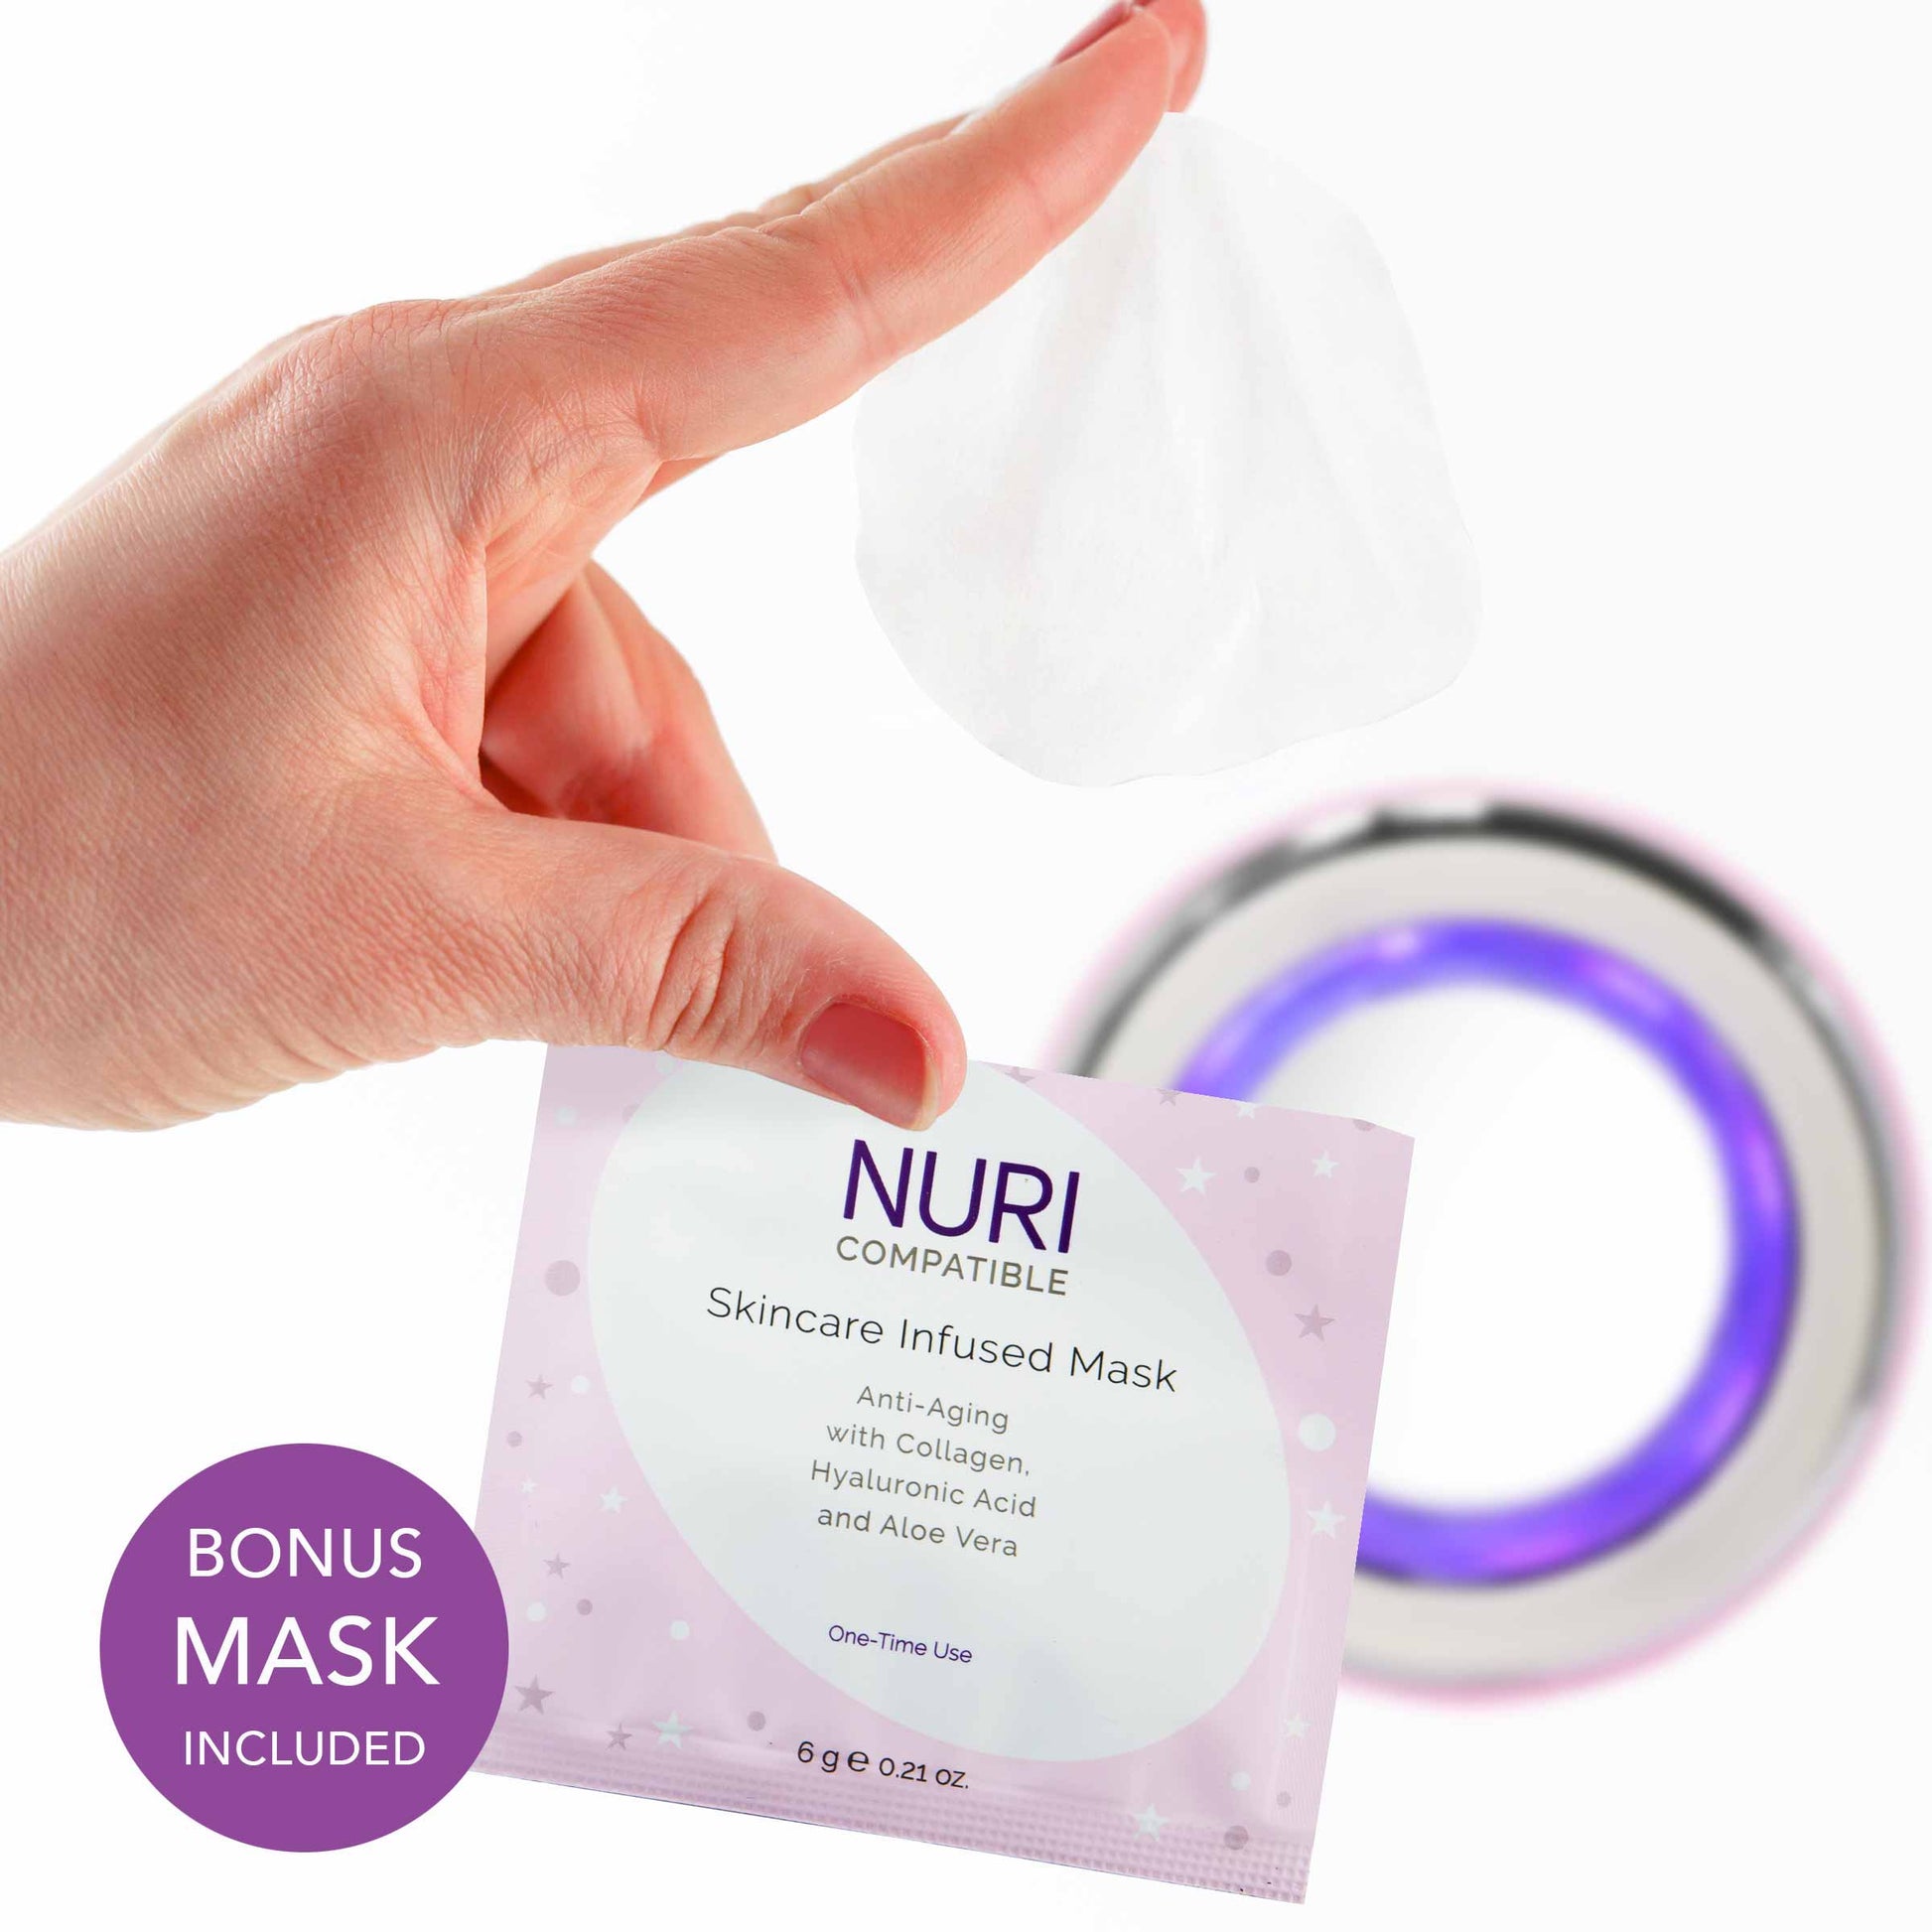 A person holding up a Spa Sciences NURI mask for facial skincare.